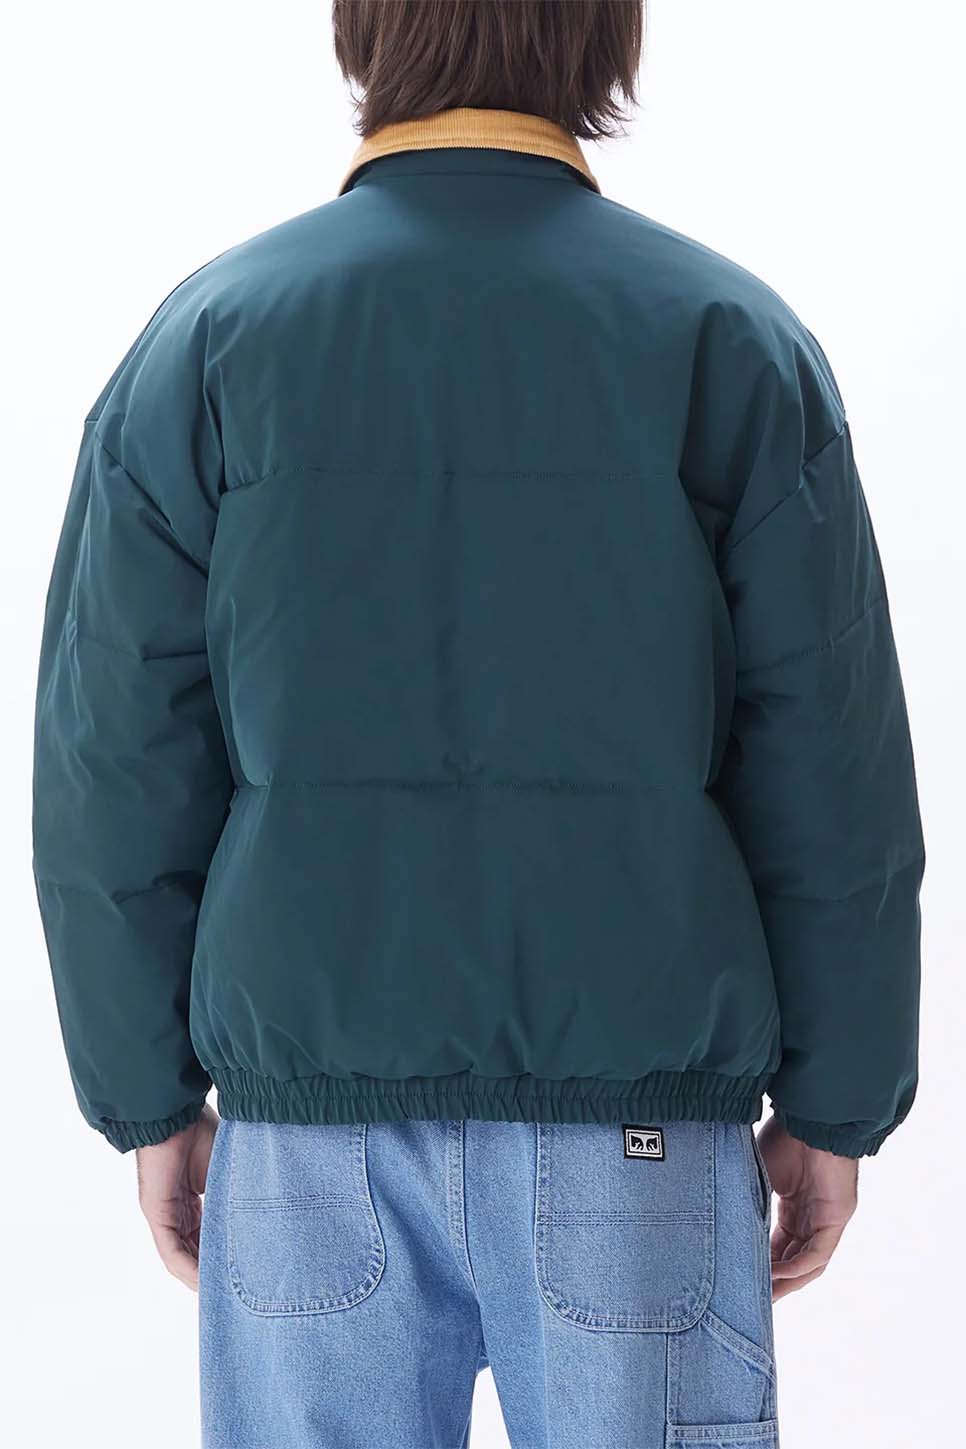 Obey - Whispers Jacket - Green Gables Multi - Back